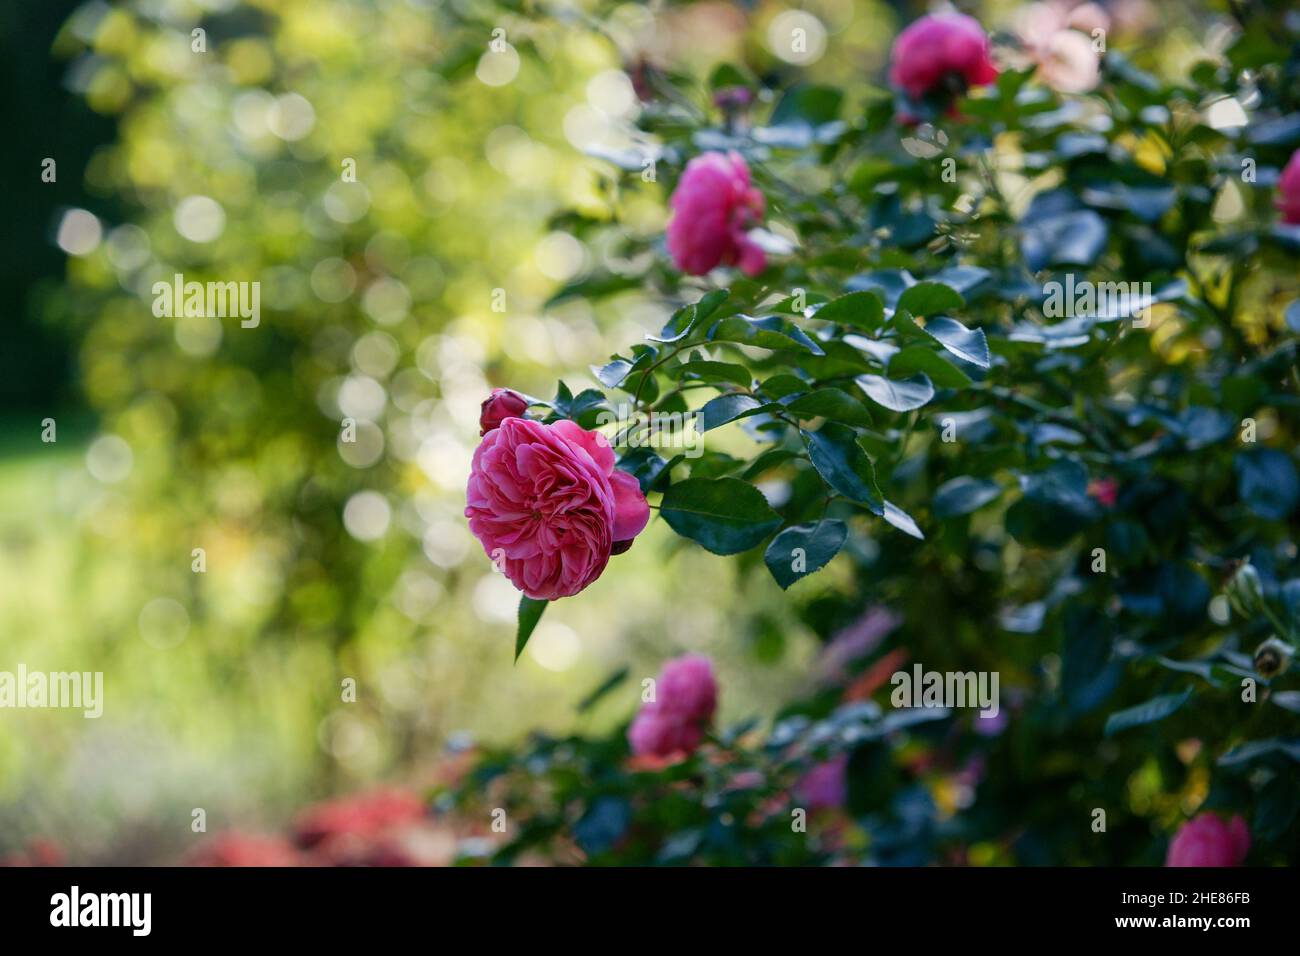 Beautiful garden rose in the garden on a sunny day on a blurred natural background Stock Photo